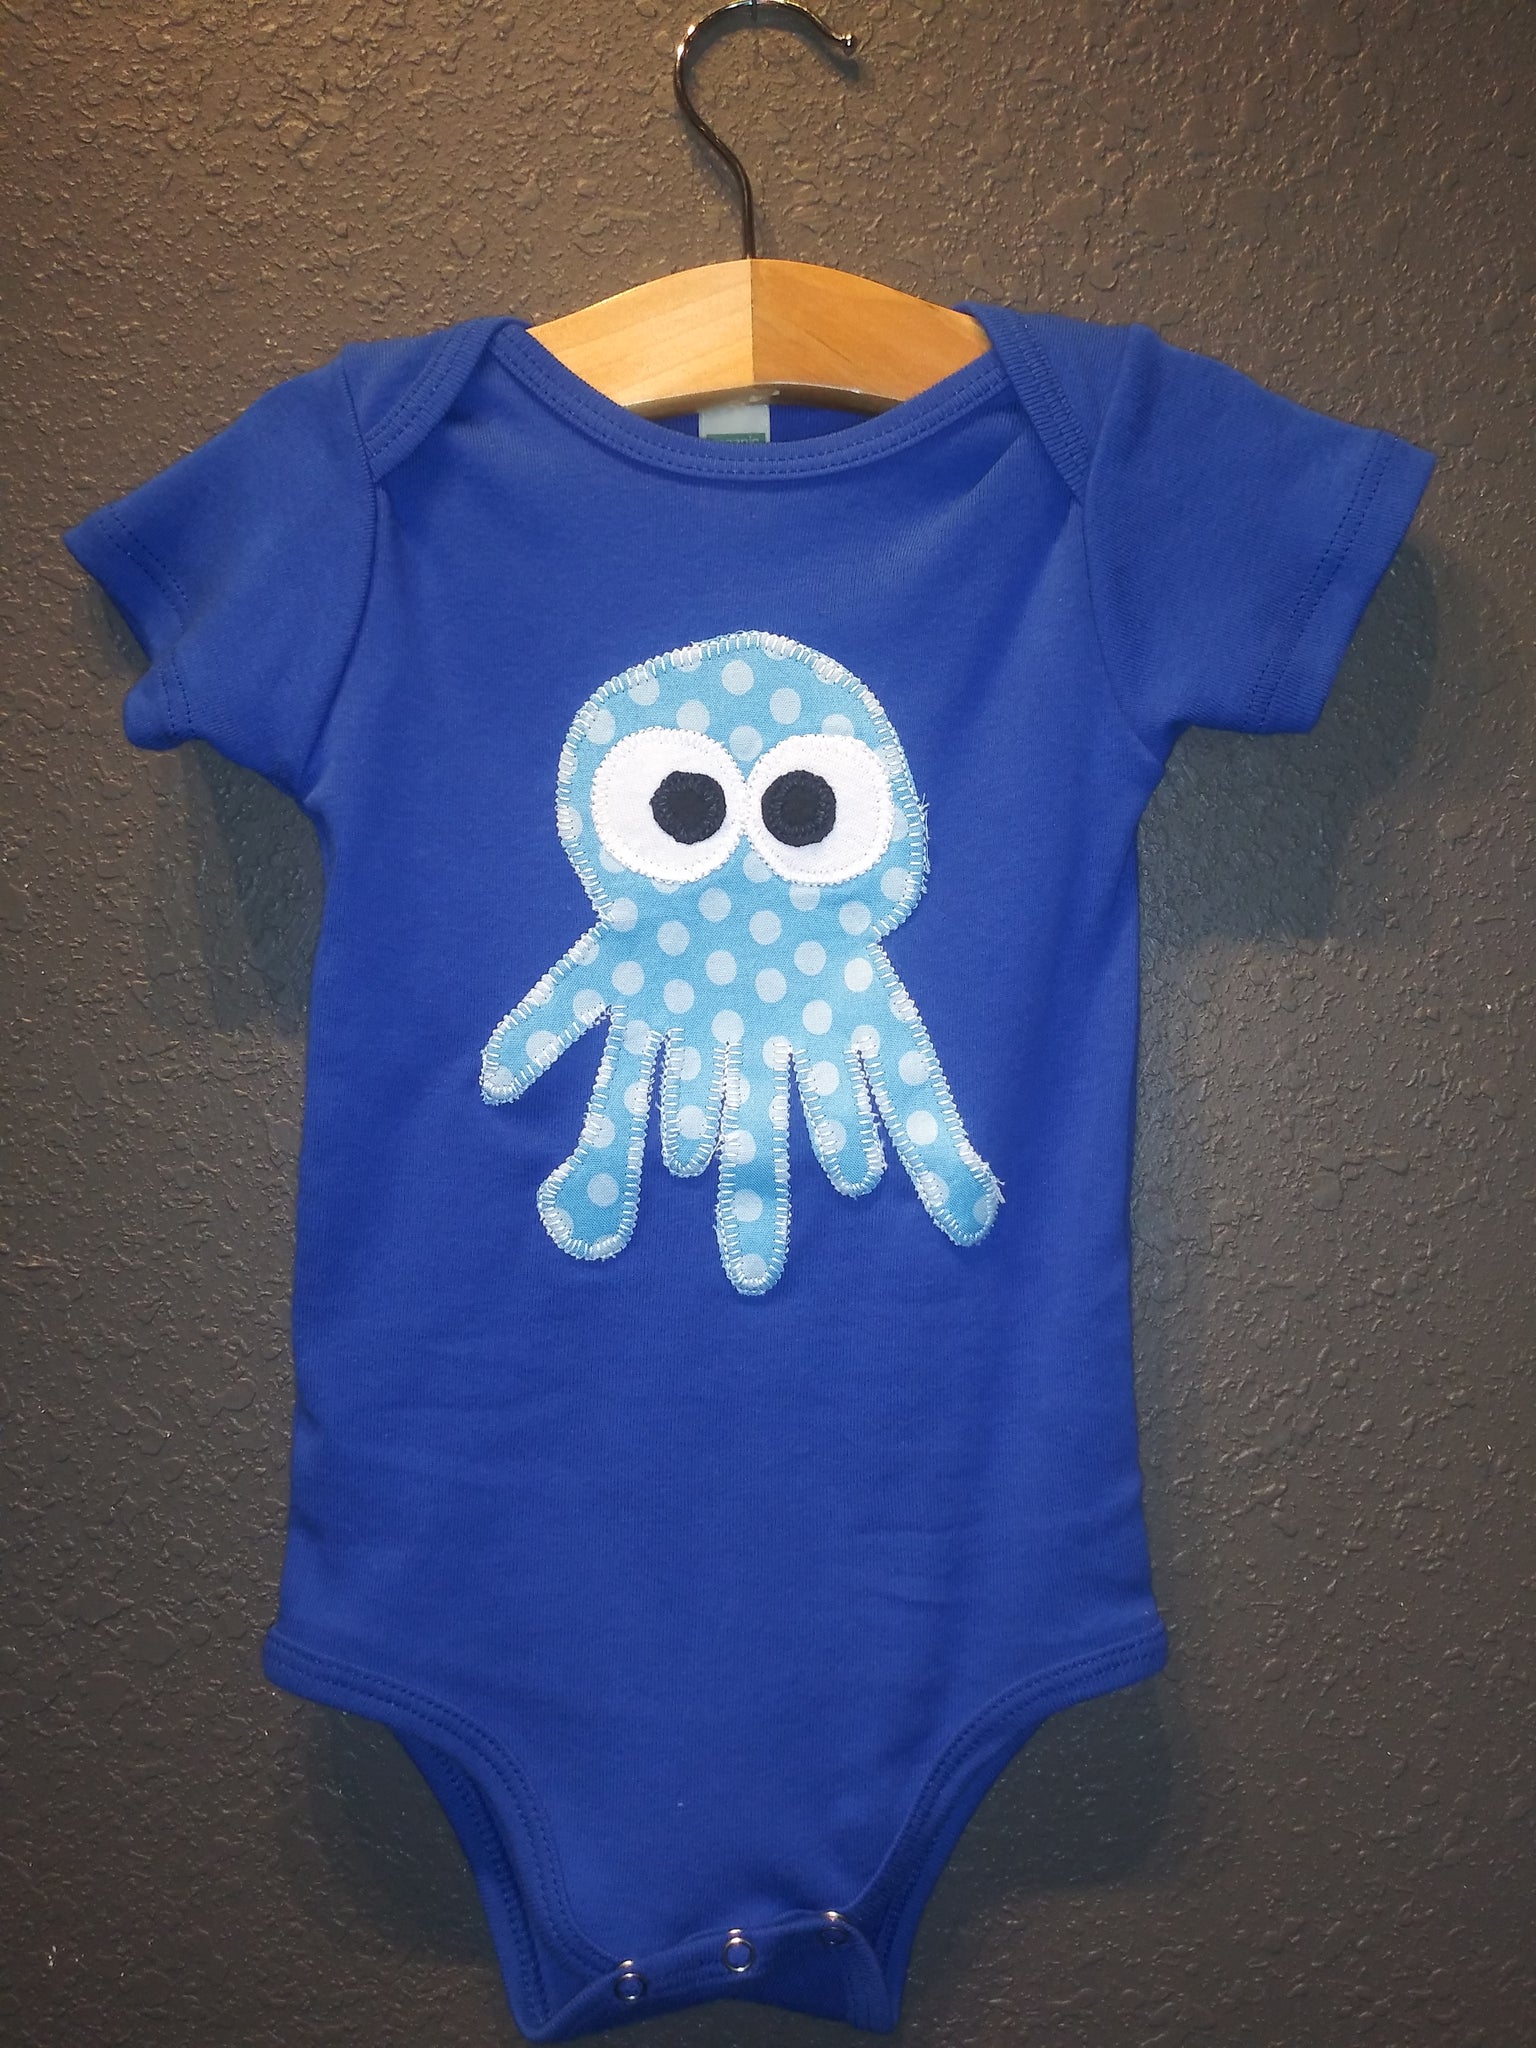 Octopus Onesie - Crunch Natural Parenting is where to buy